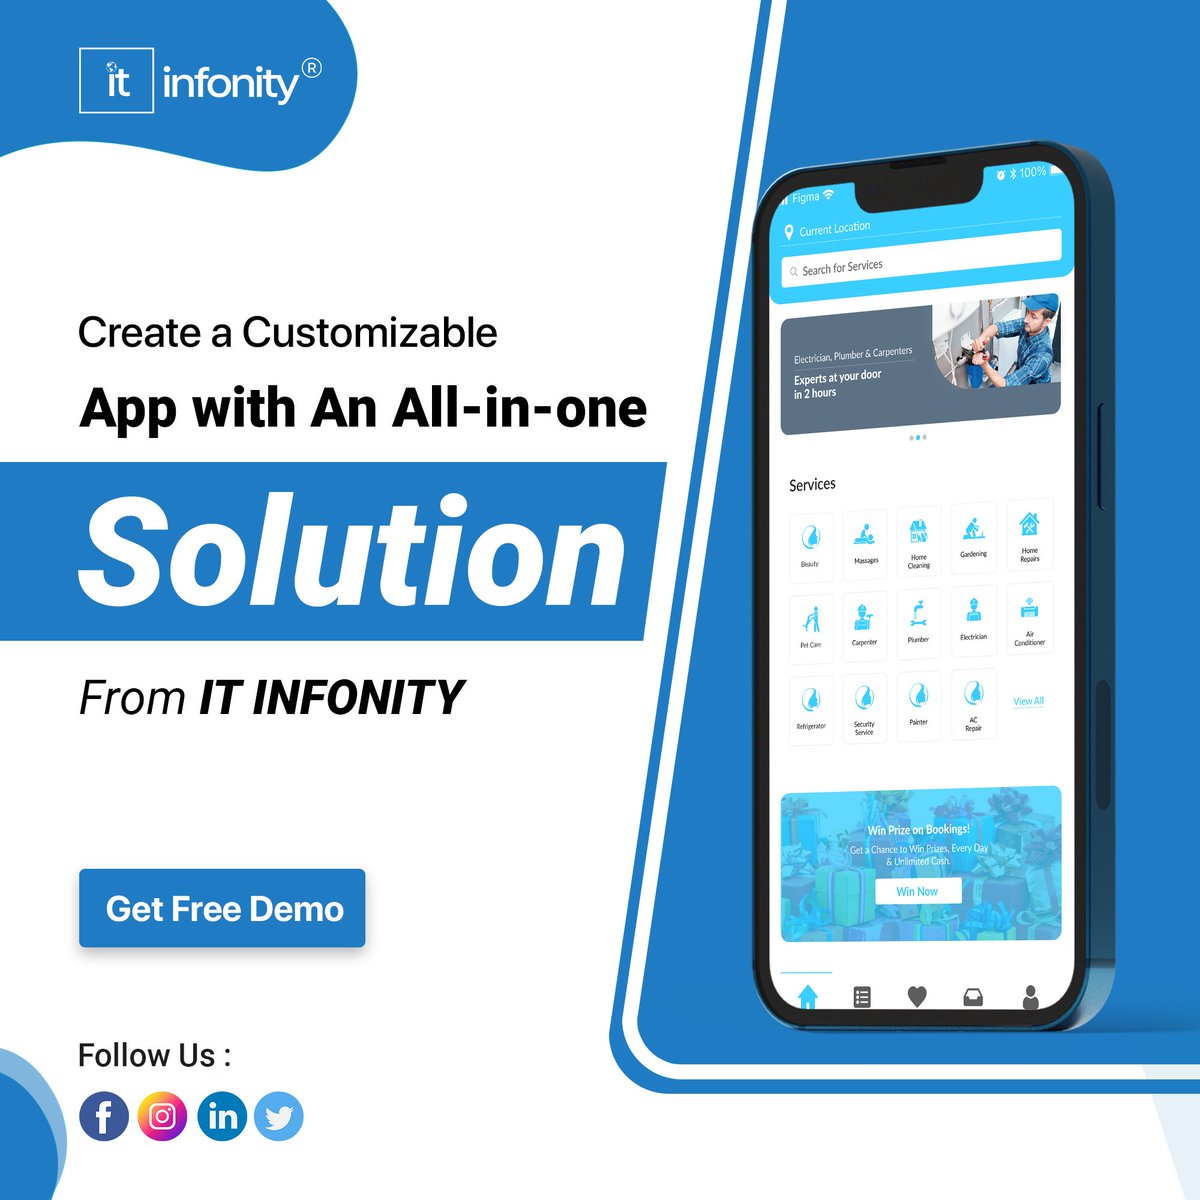 Looking to launch a successful customizable mobile app?

#customappdevelopment #customappsolutions #growyourbusiness  #customappdesign #mobileappdevelopment #mobileappdevelopmentcompany #onlineservices #startbusinessonline #appdevelopers #technology #itinfonity